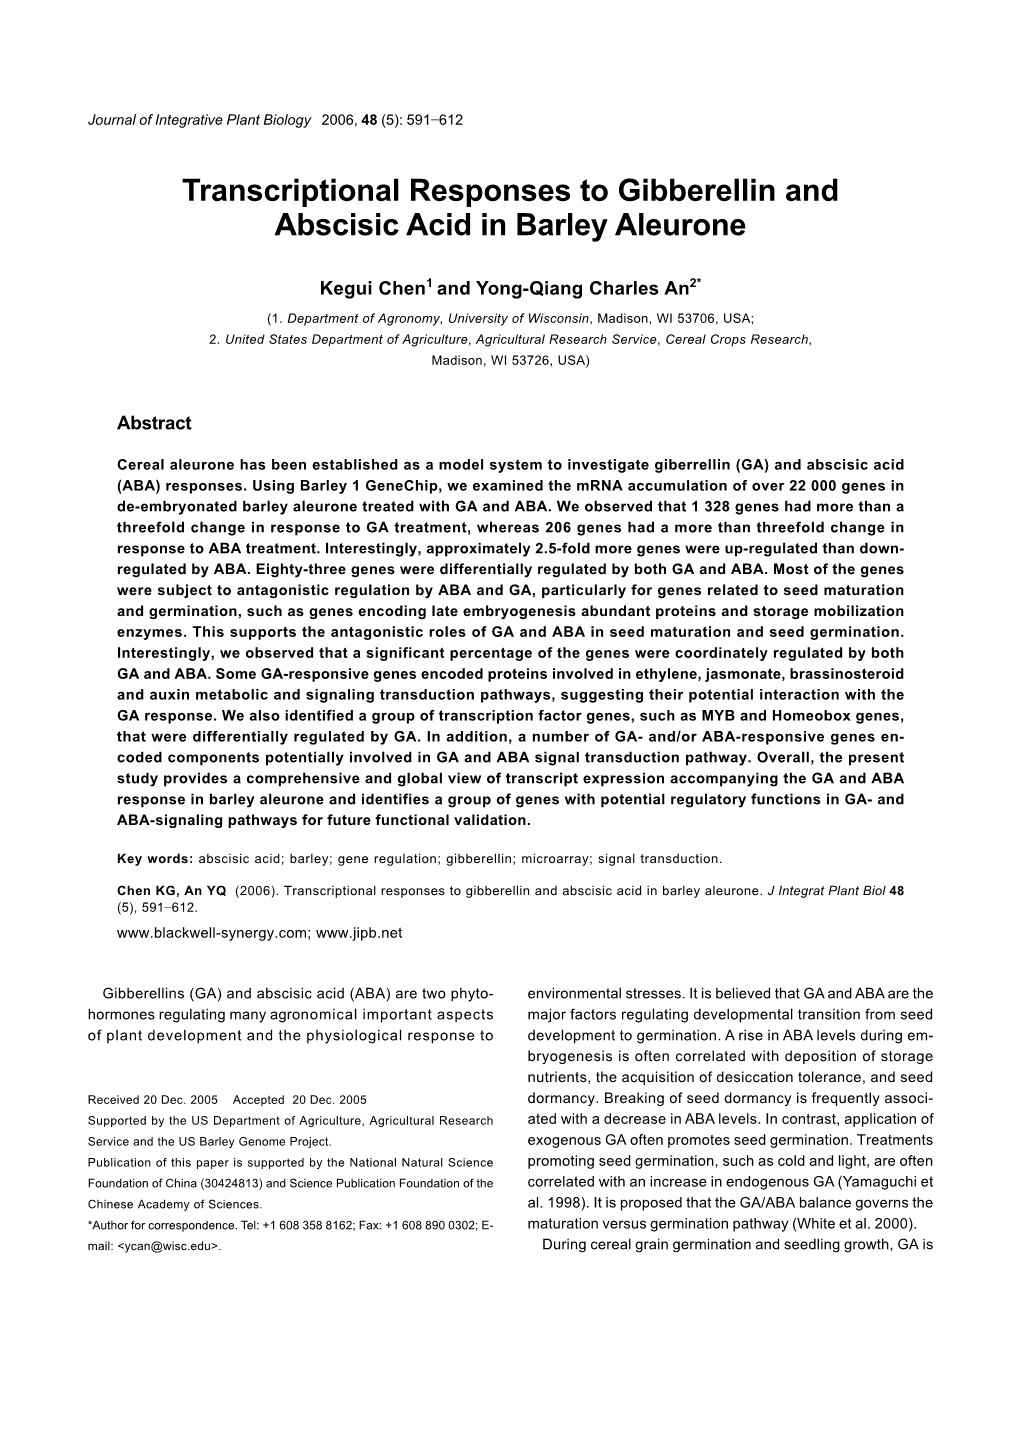 Transcriptional Responses to Gibberellin and Abscisic Acid in Barley Aleurone